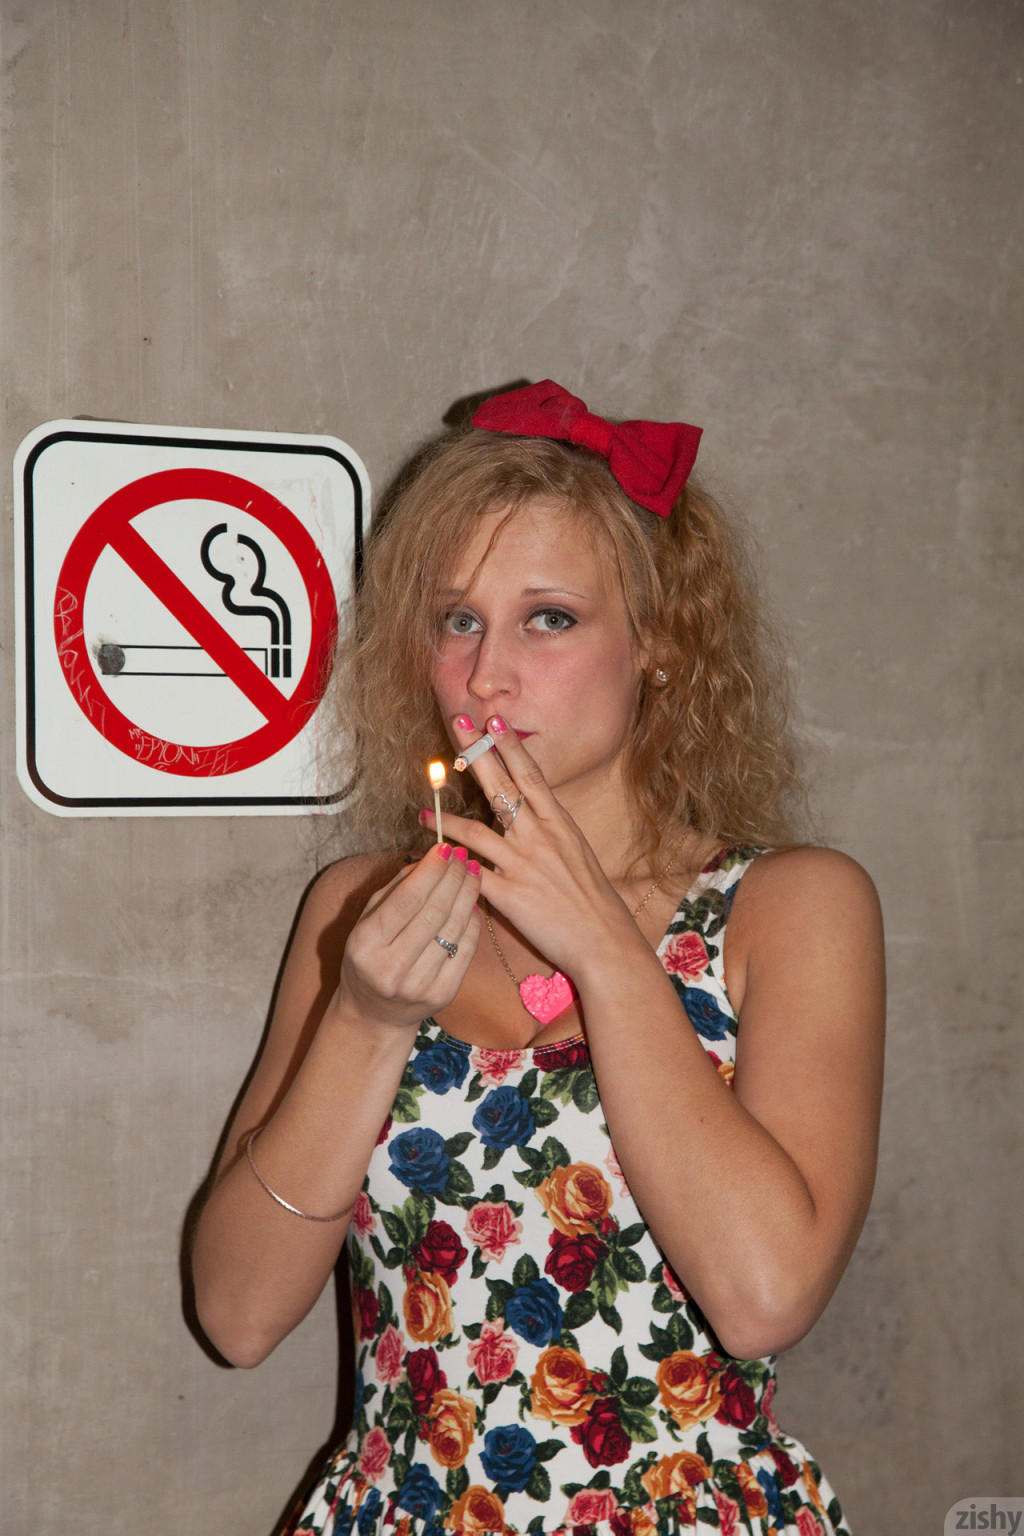 Rebel girl with curly hair smoking under a no smoking sign #67337342